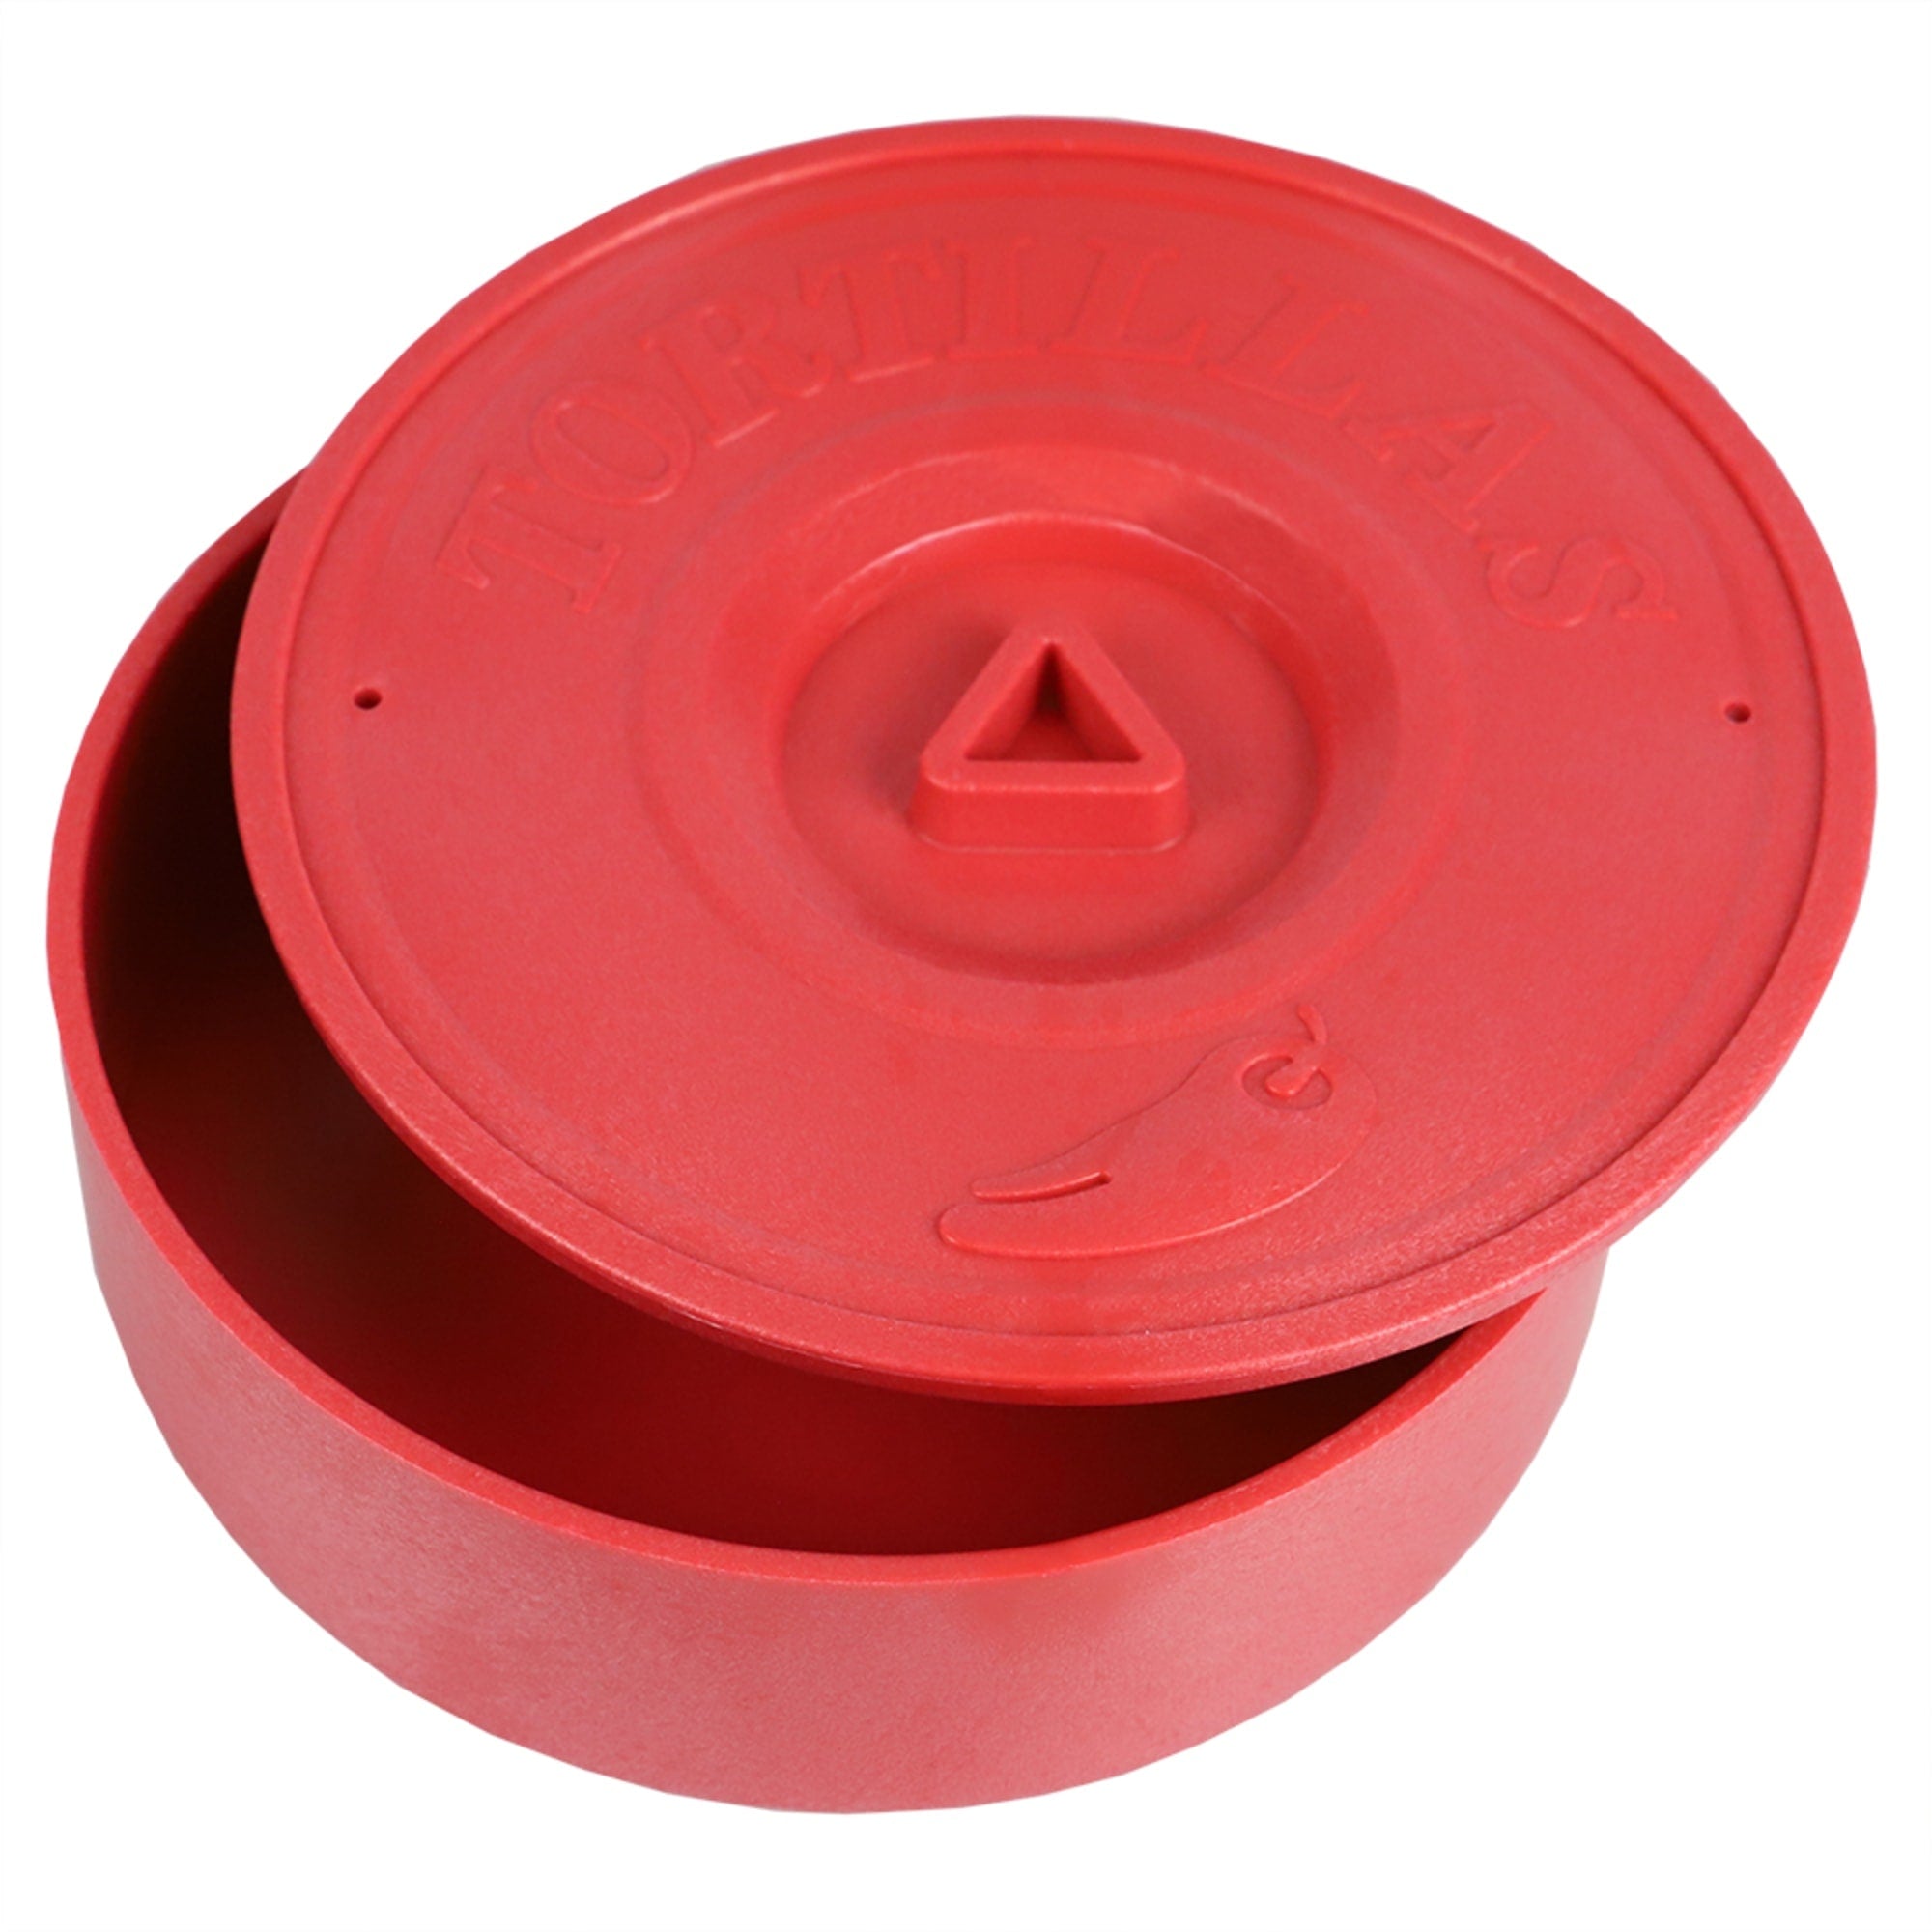 Home Basics Round BPA-free Plastic Tortilla Warmer, Red $6.00 EACH, CASE PACK OF 12